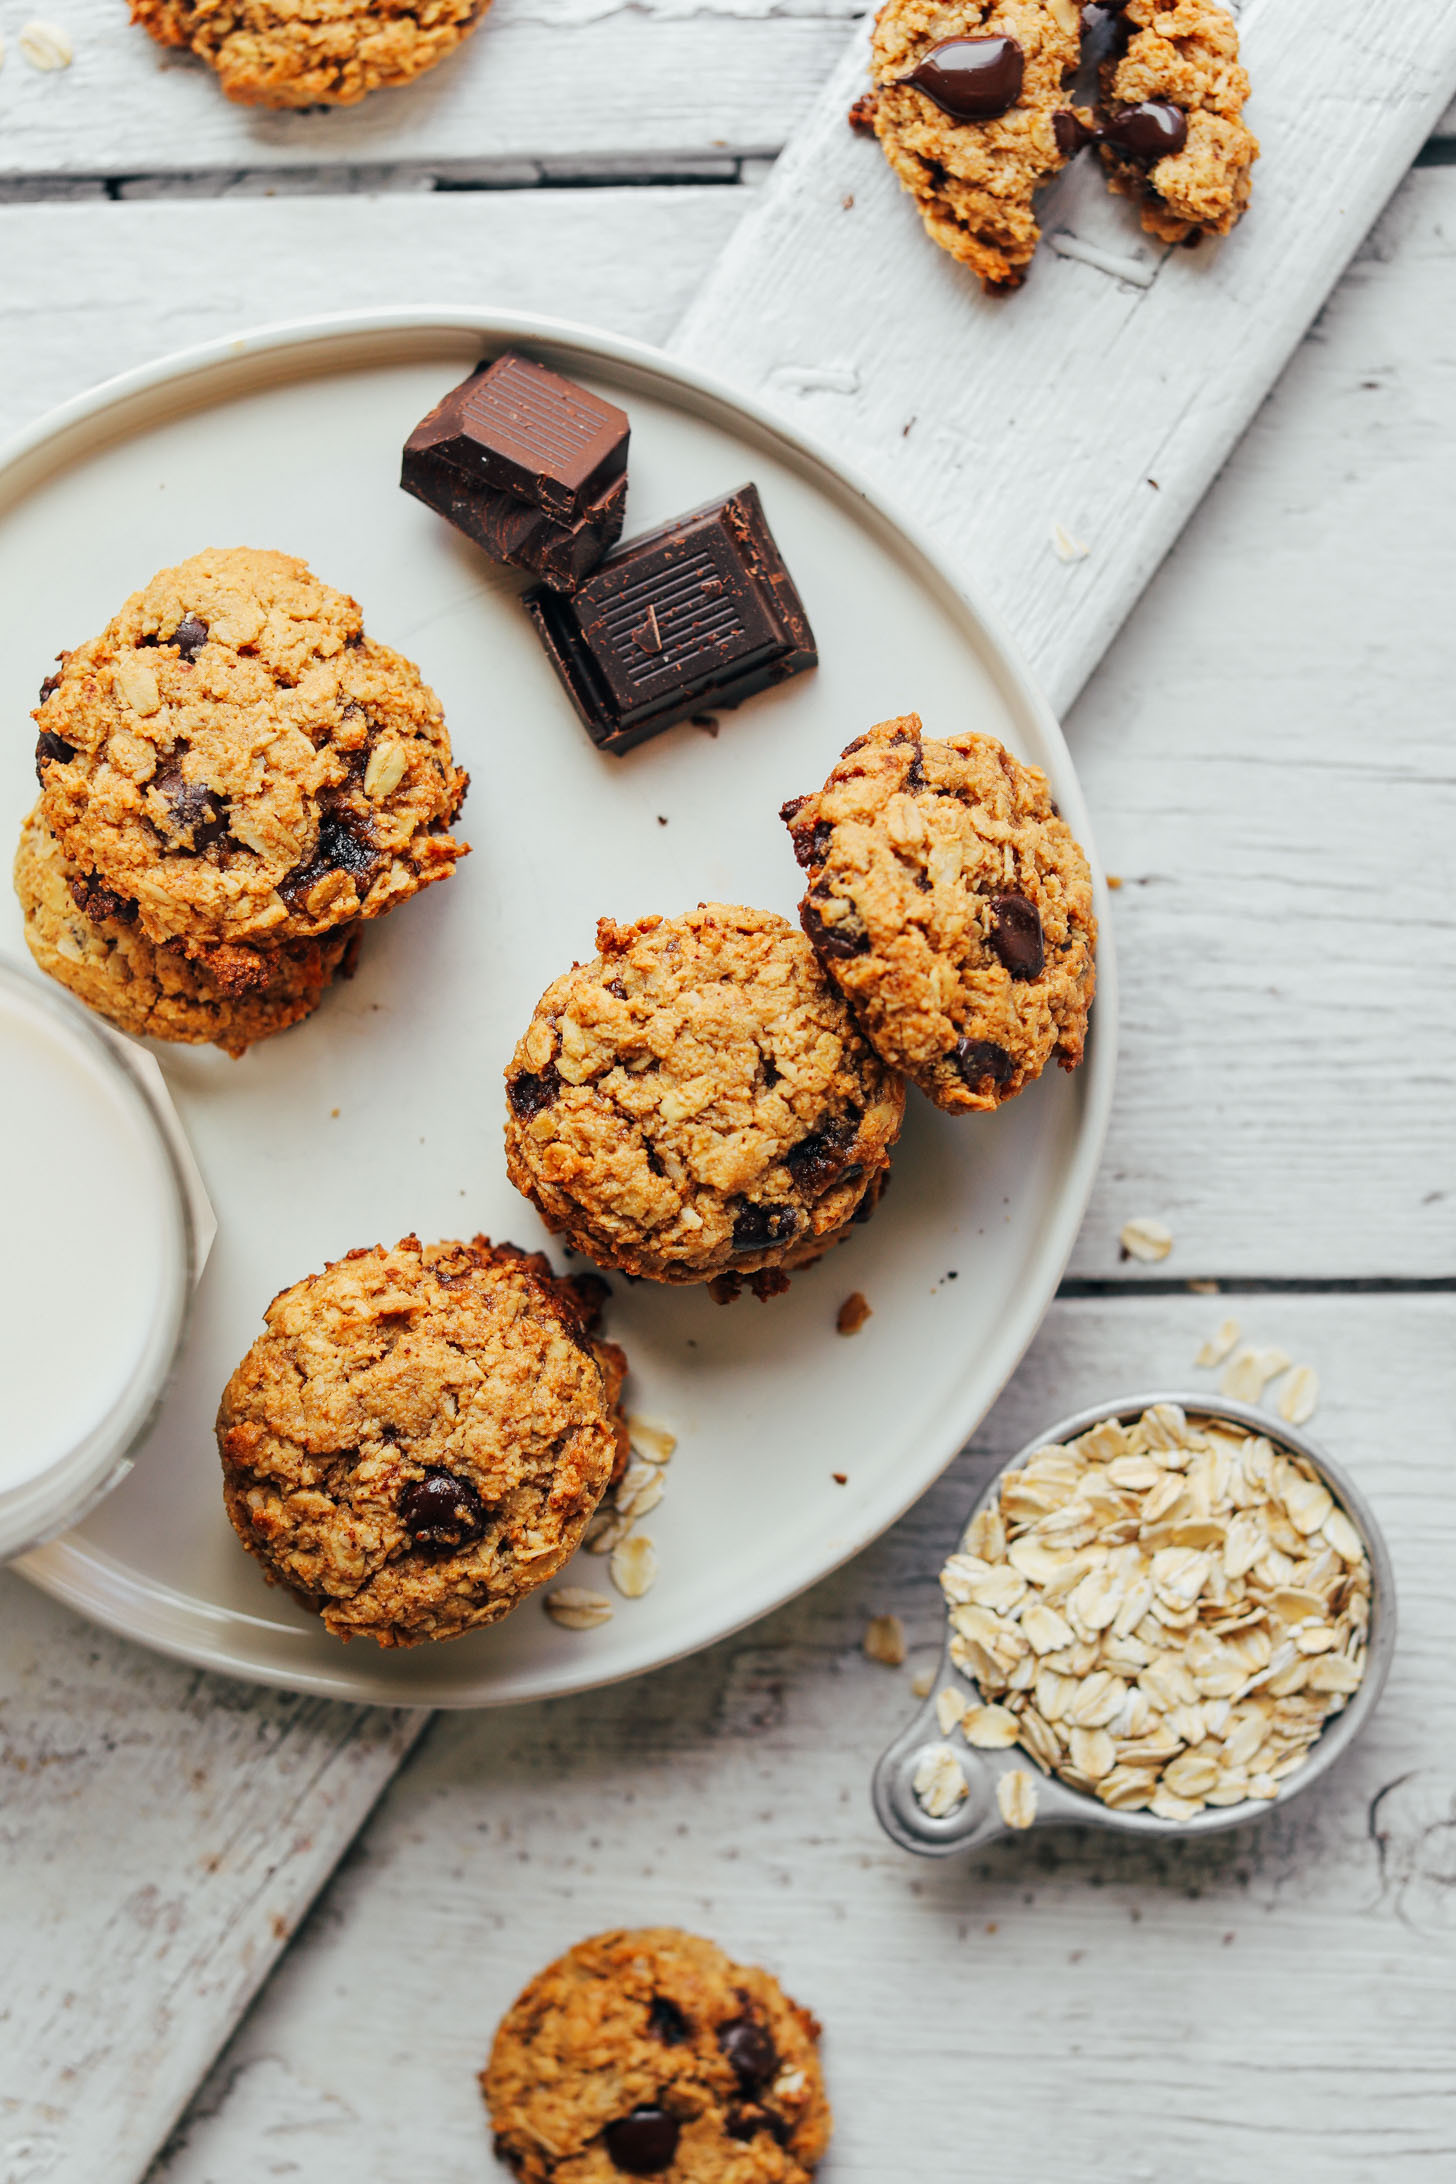 Oat Chocolate Chip Cookies Healthy
 healthy oatmeal chocolate chip cookies gluten free